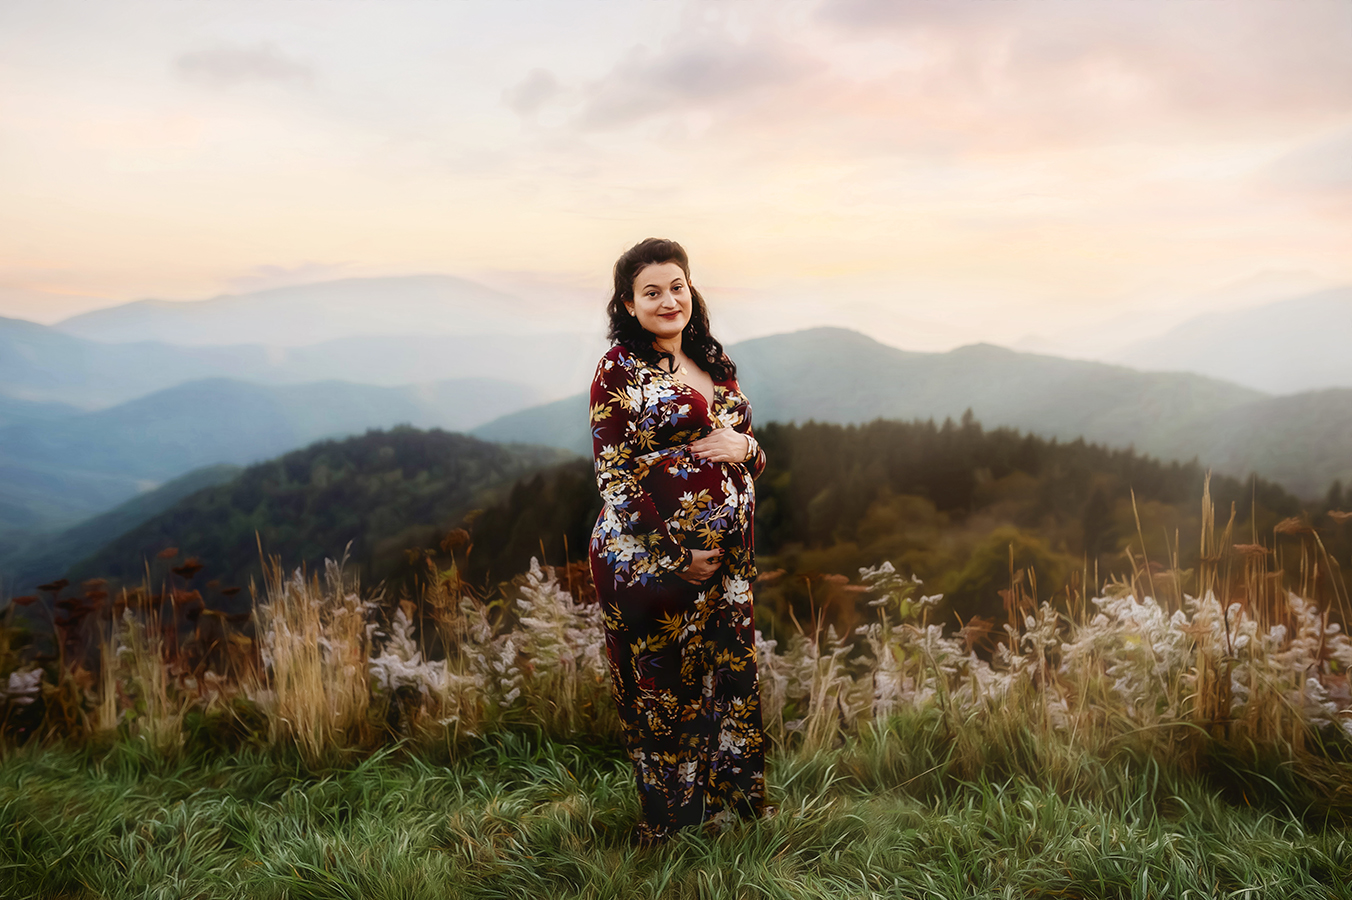 Maternity Photoshoot on the Blue Ridge Parkway in Asheville, NC.